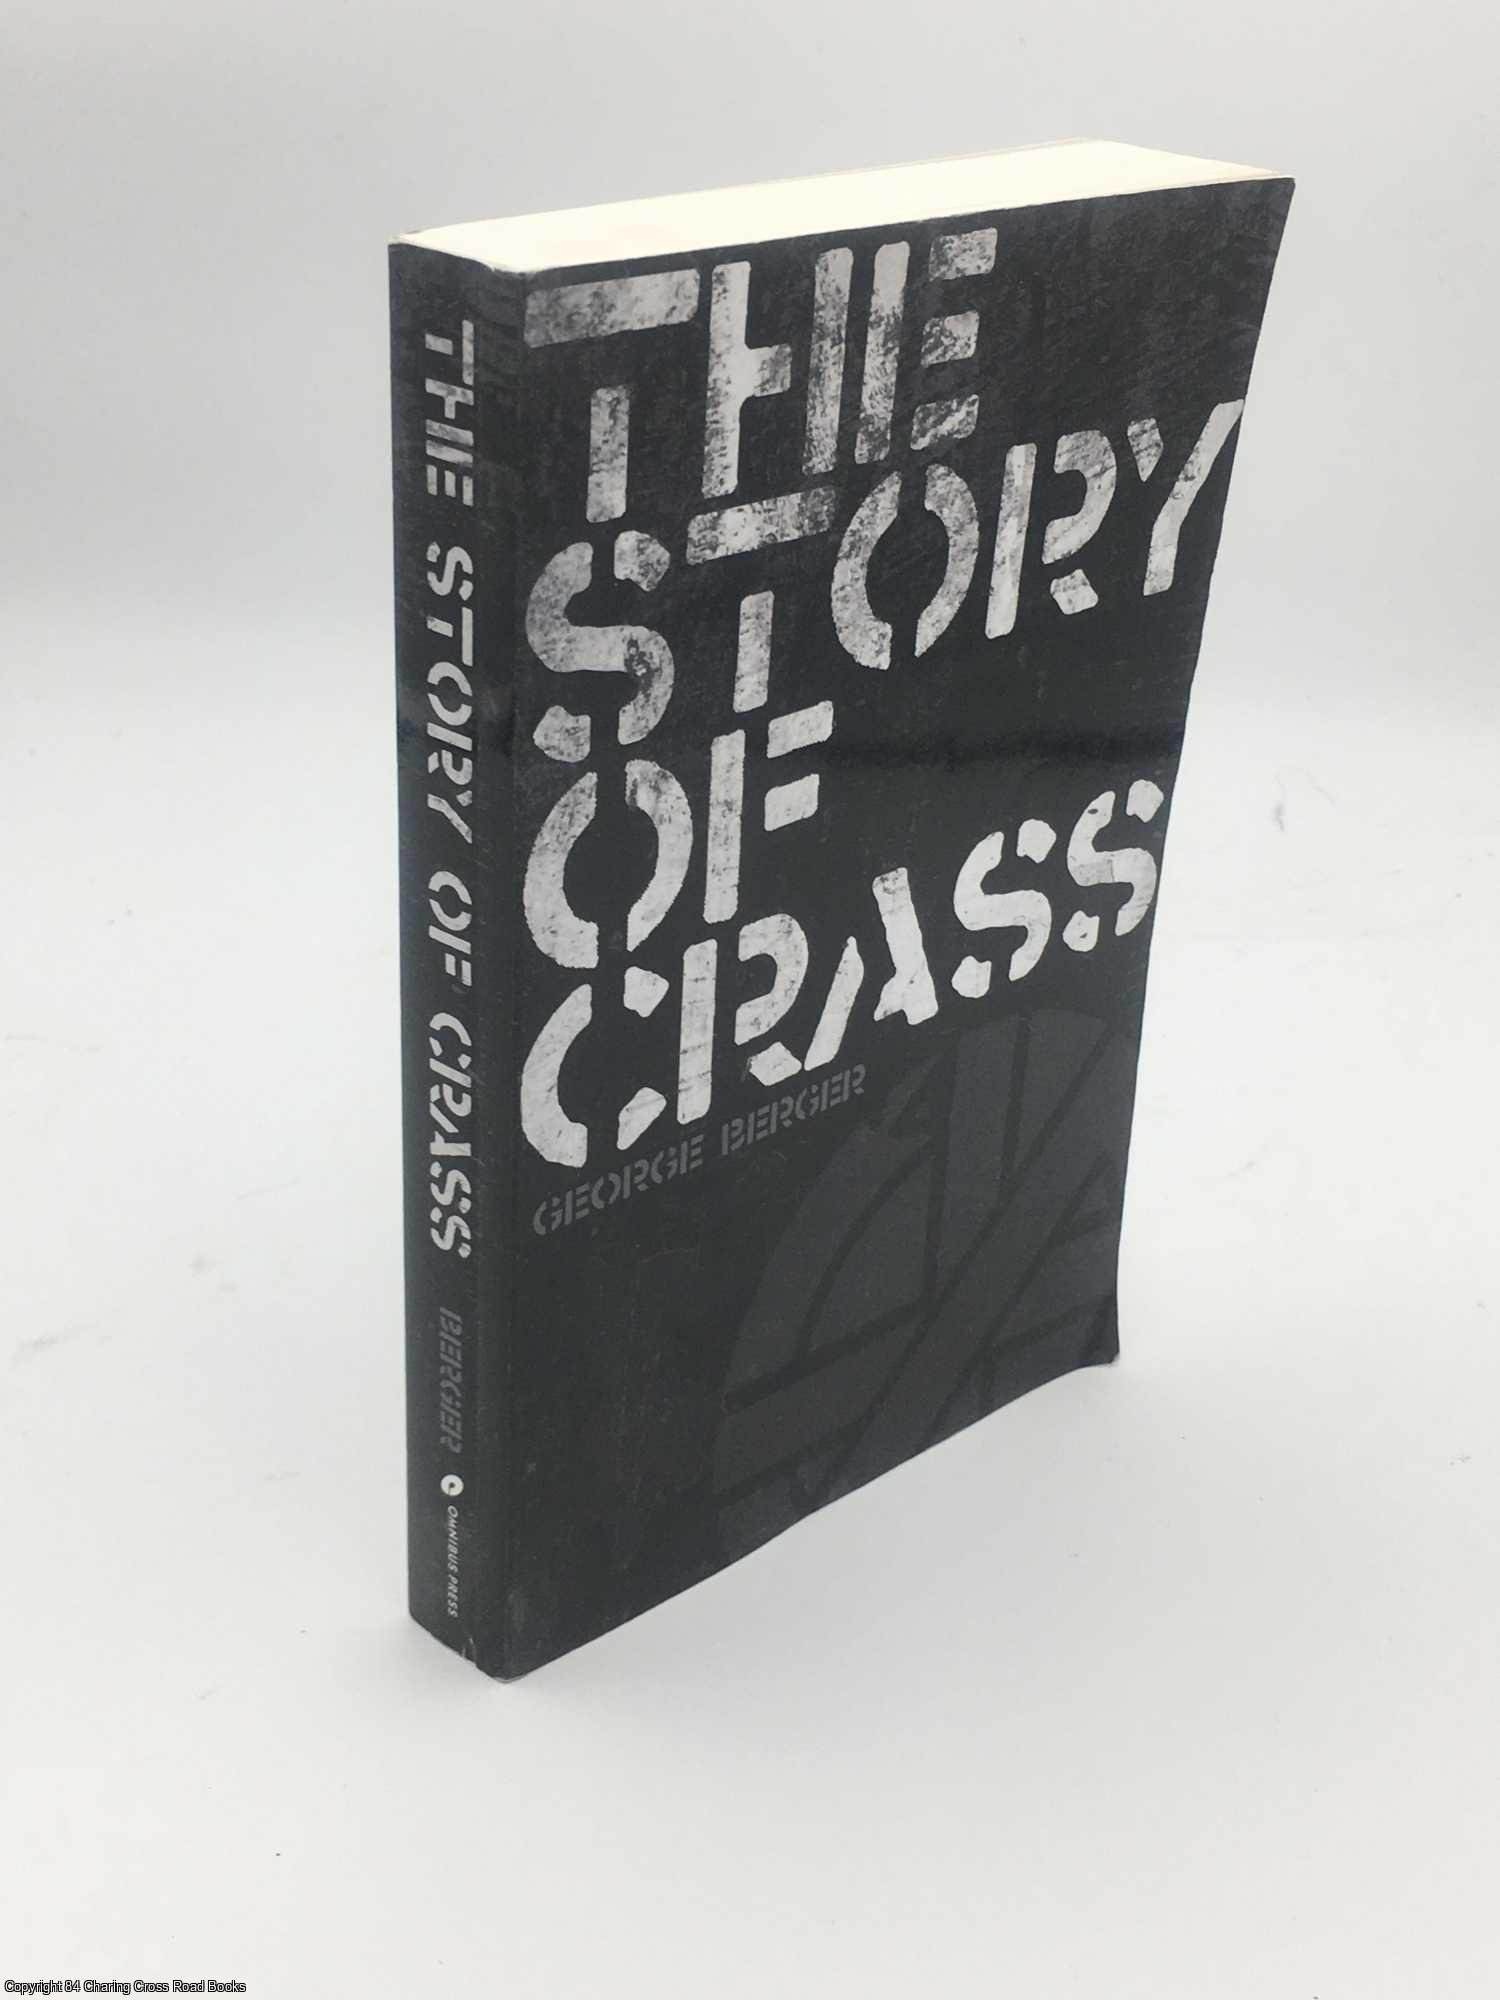 Berger, George - The Story of Crass